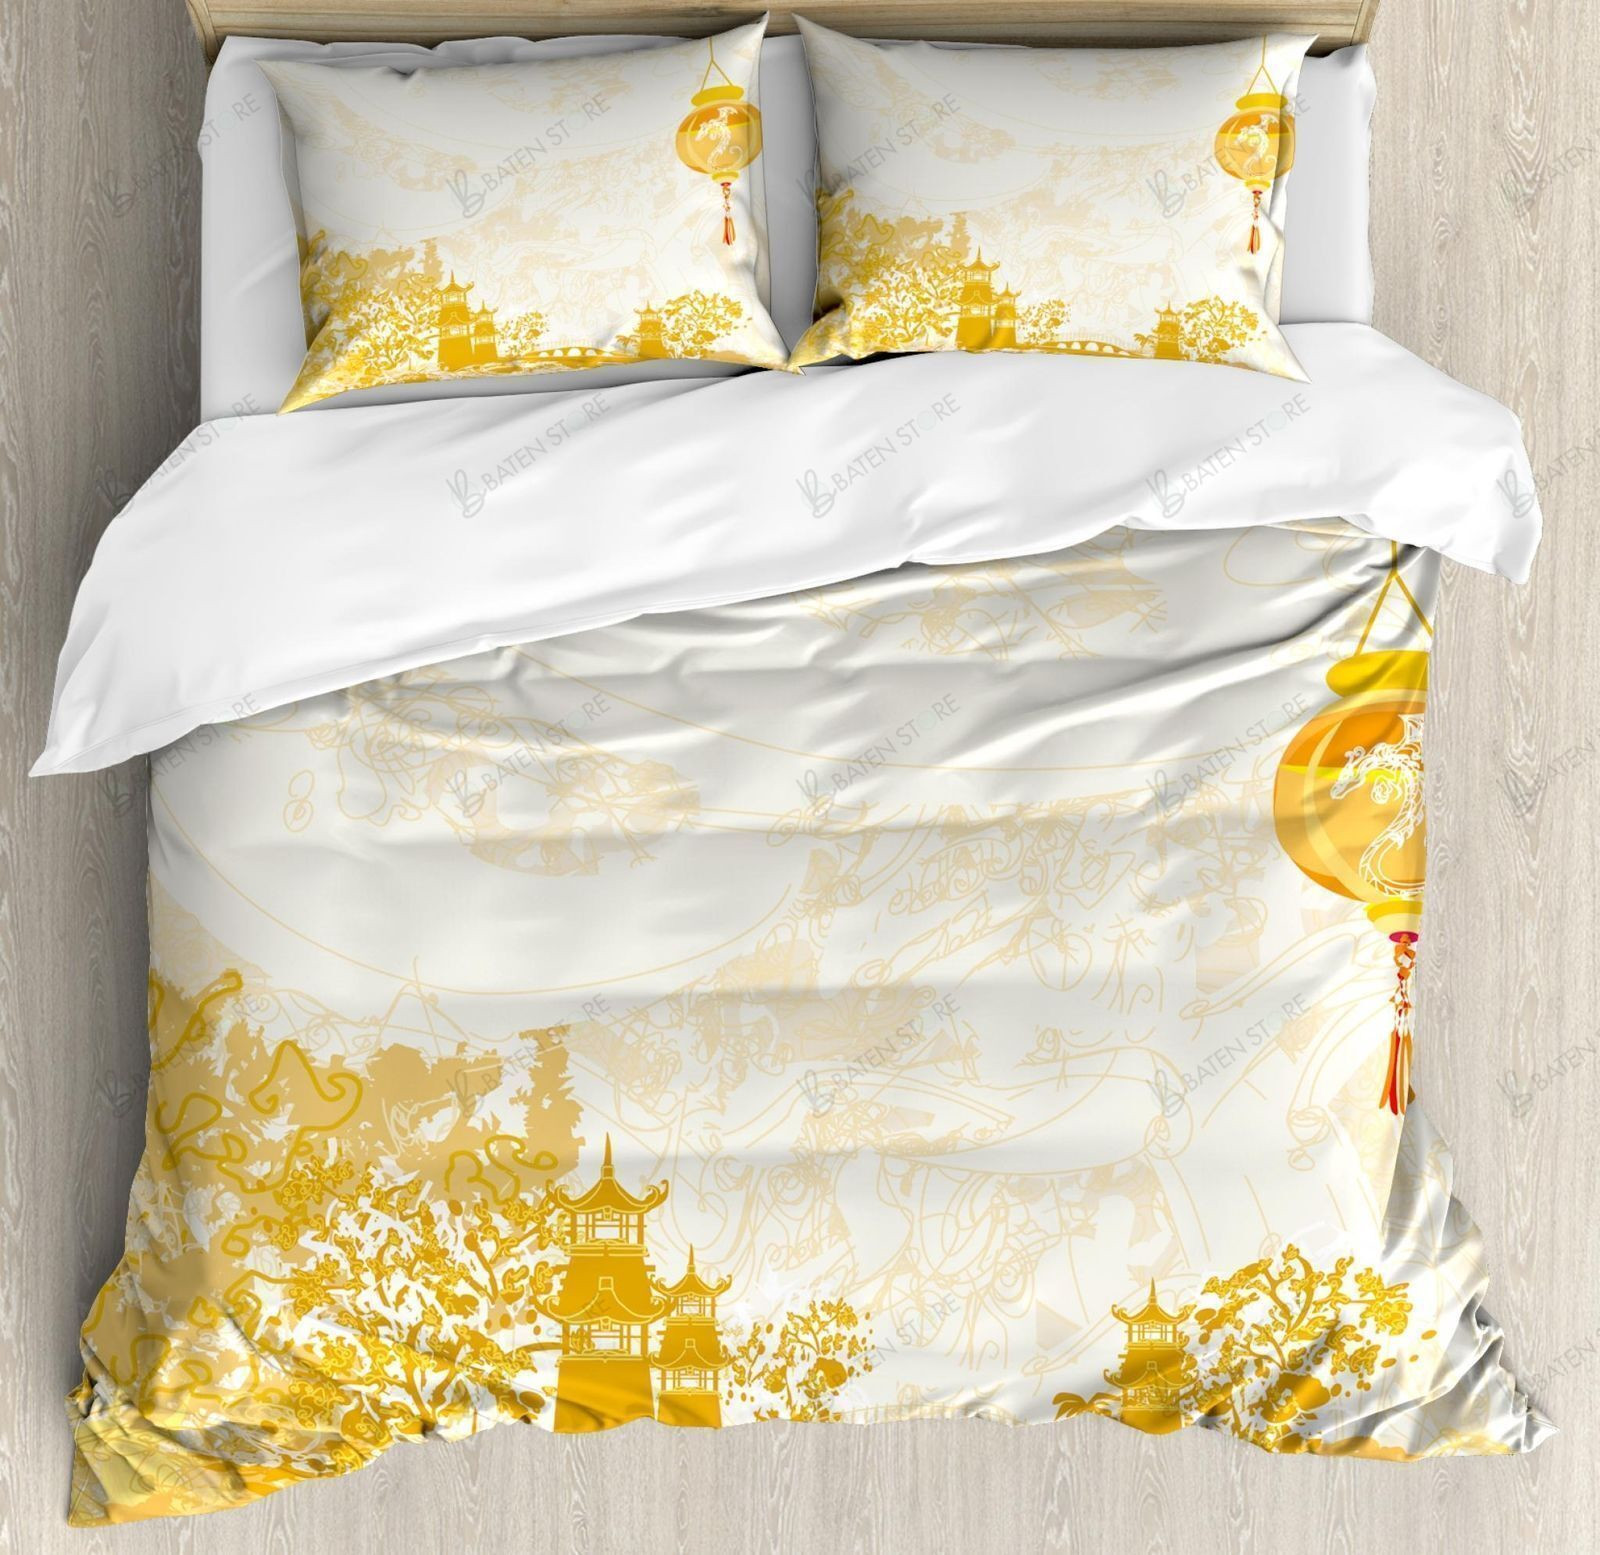 yellow lantern bed sheets duvet cover bedding set perfect gifts for birthdays christmas and thanksgiving mly8b